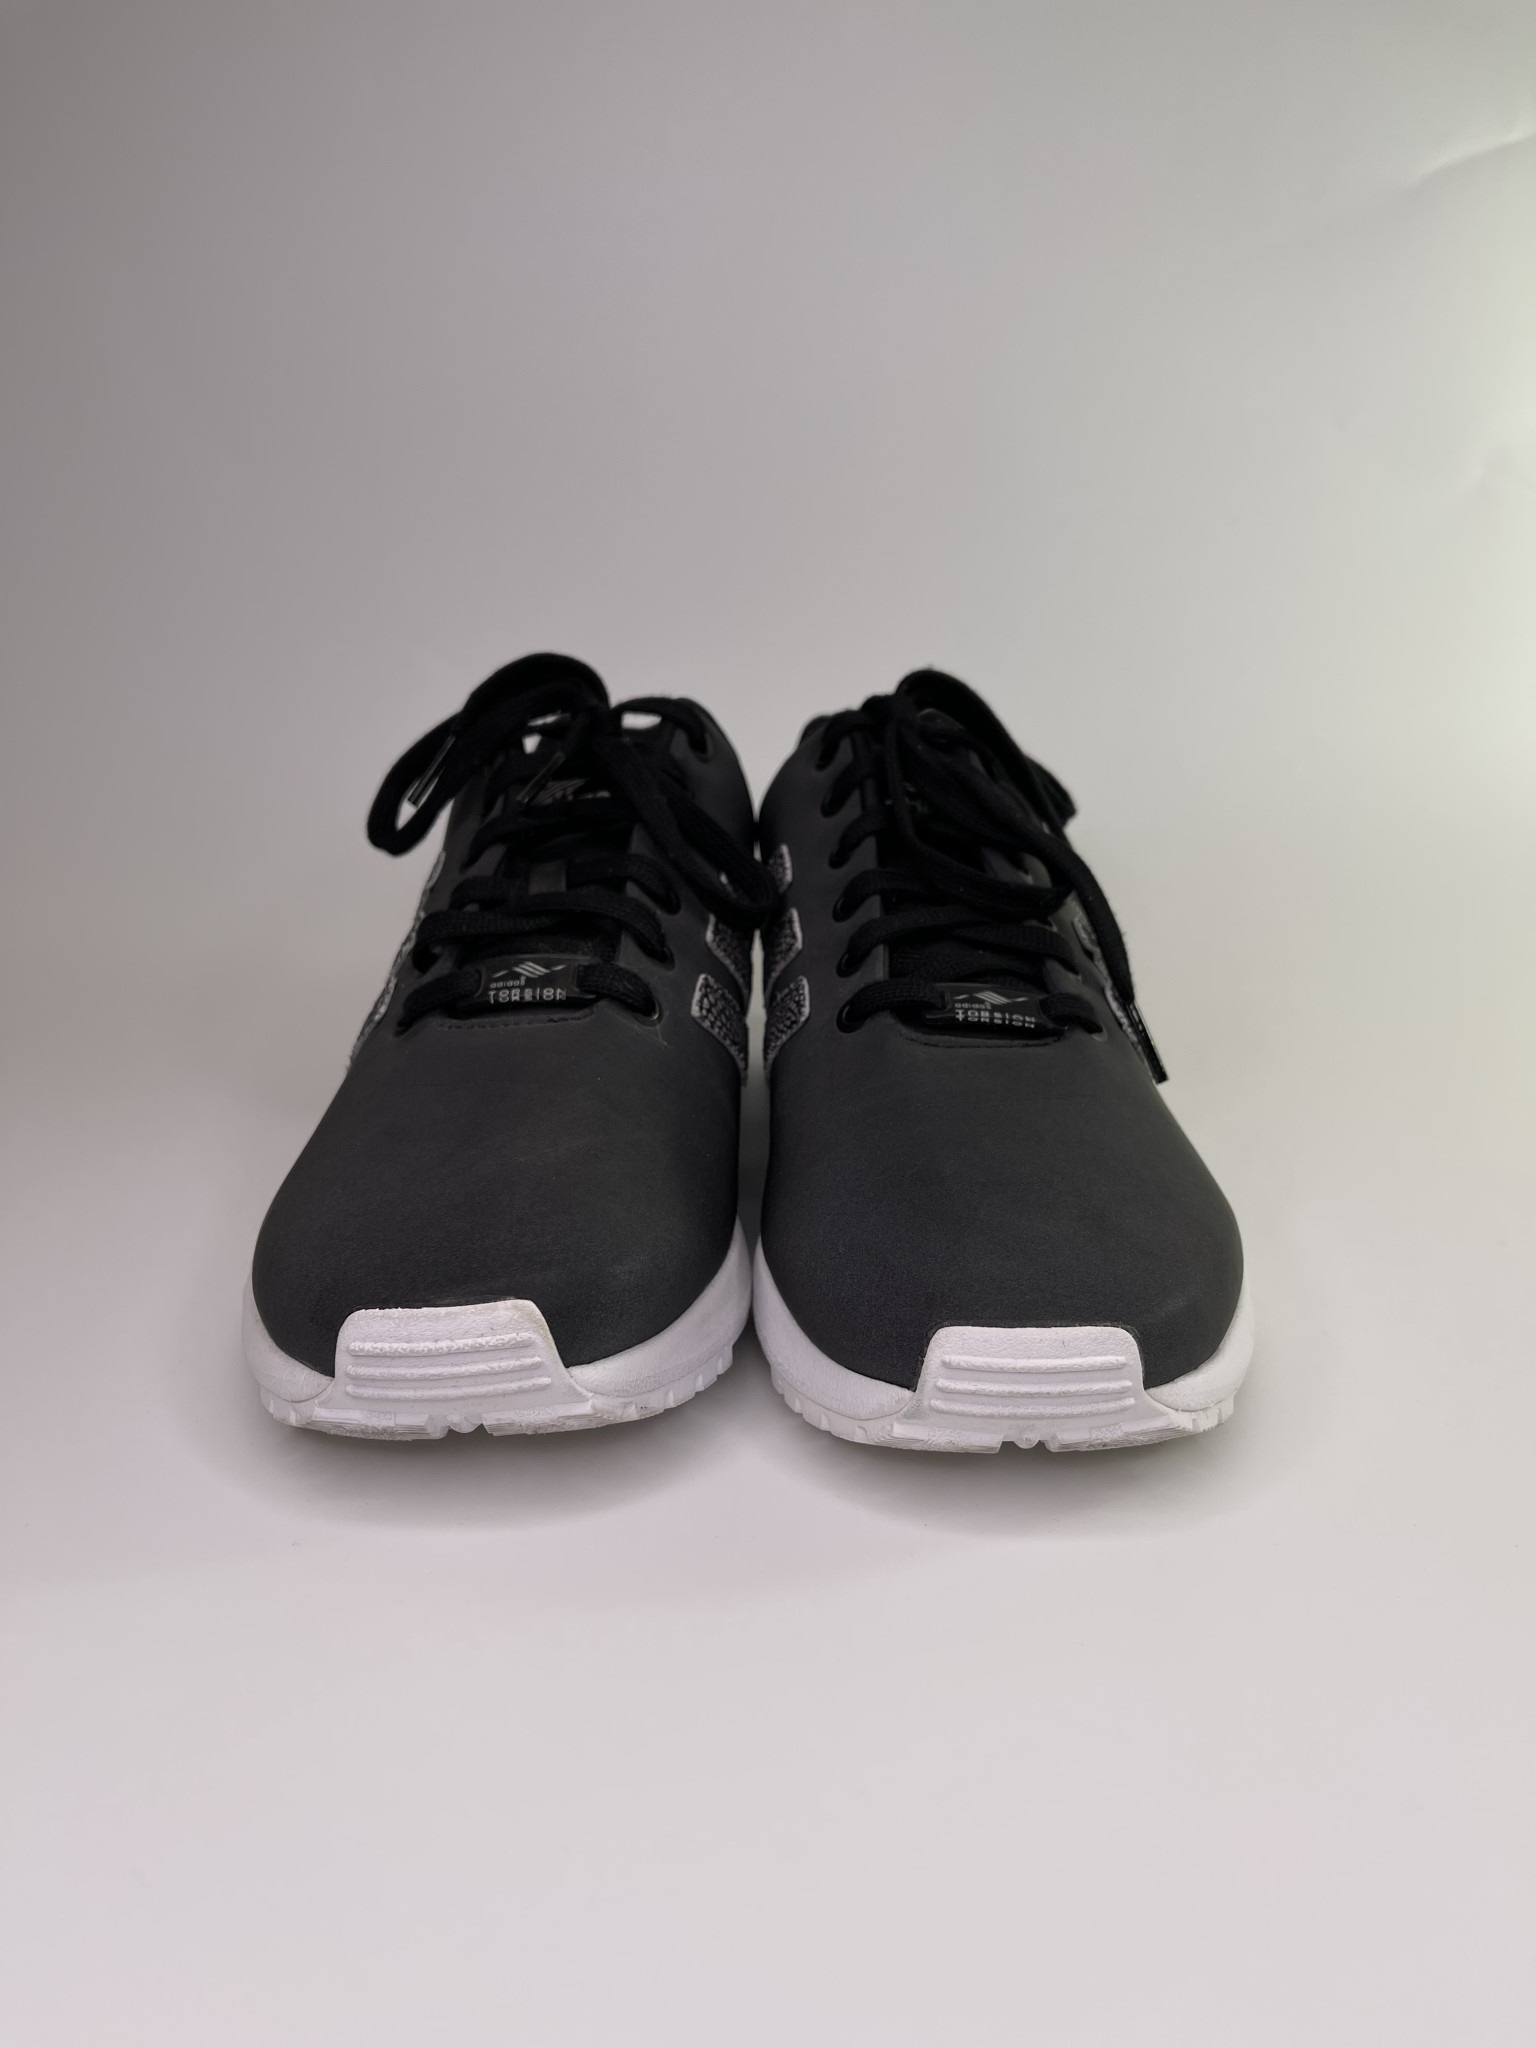 ADIDAS ZX FLUX W SNEAKERS (10 US) - CRTBLNCHSHP